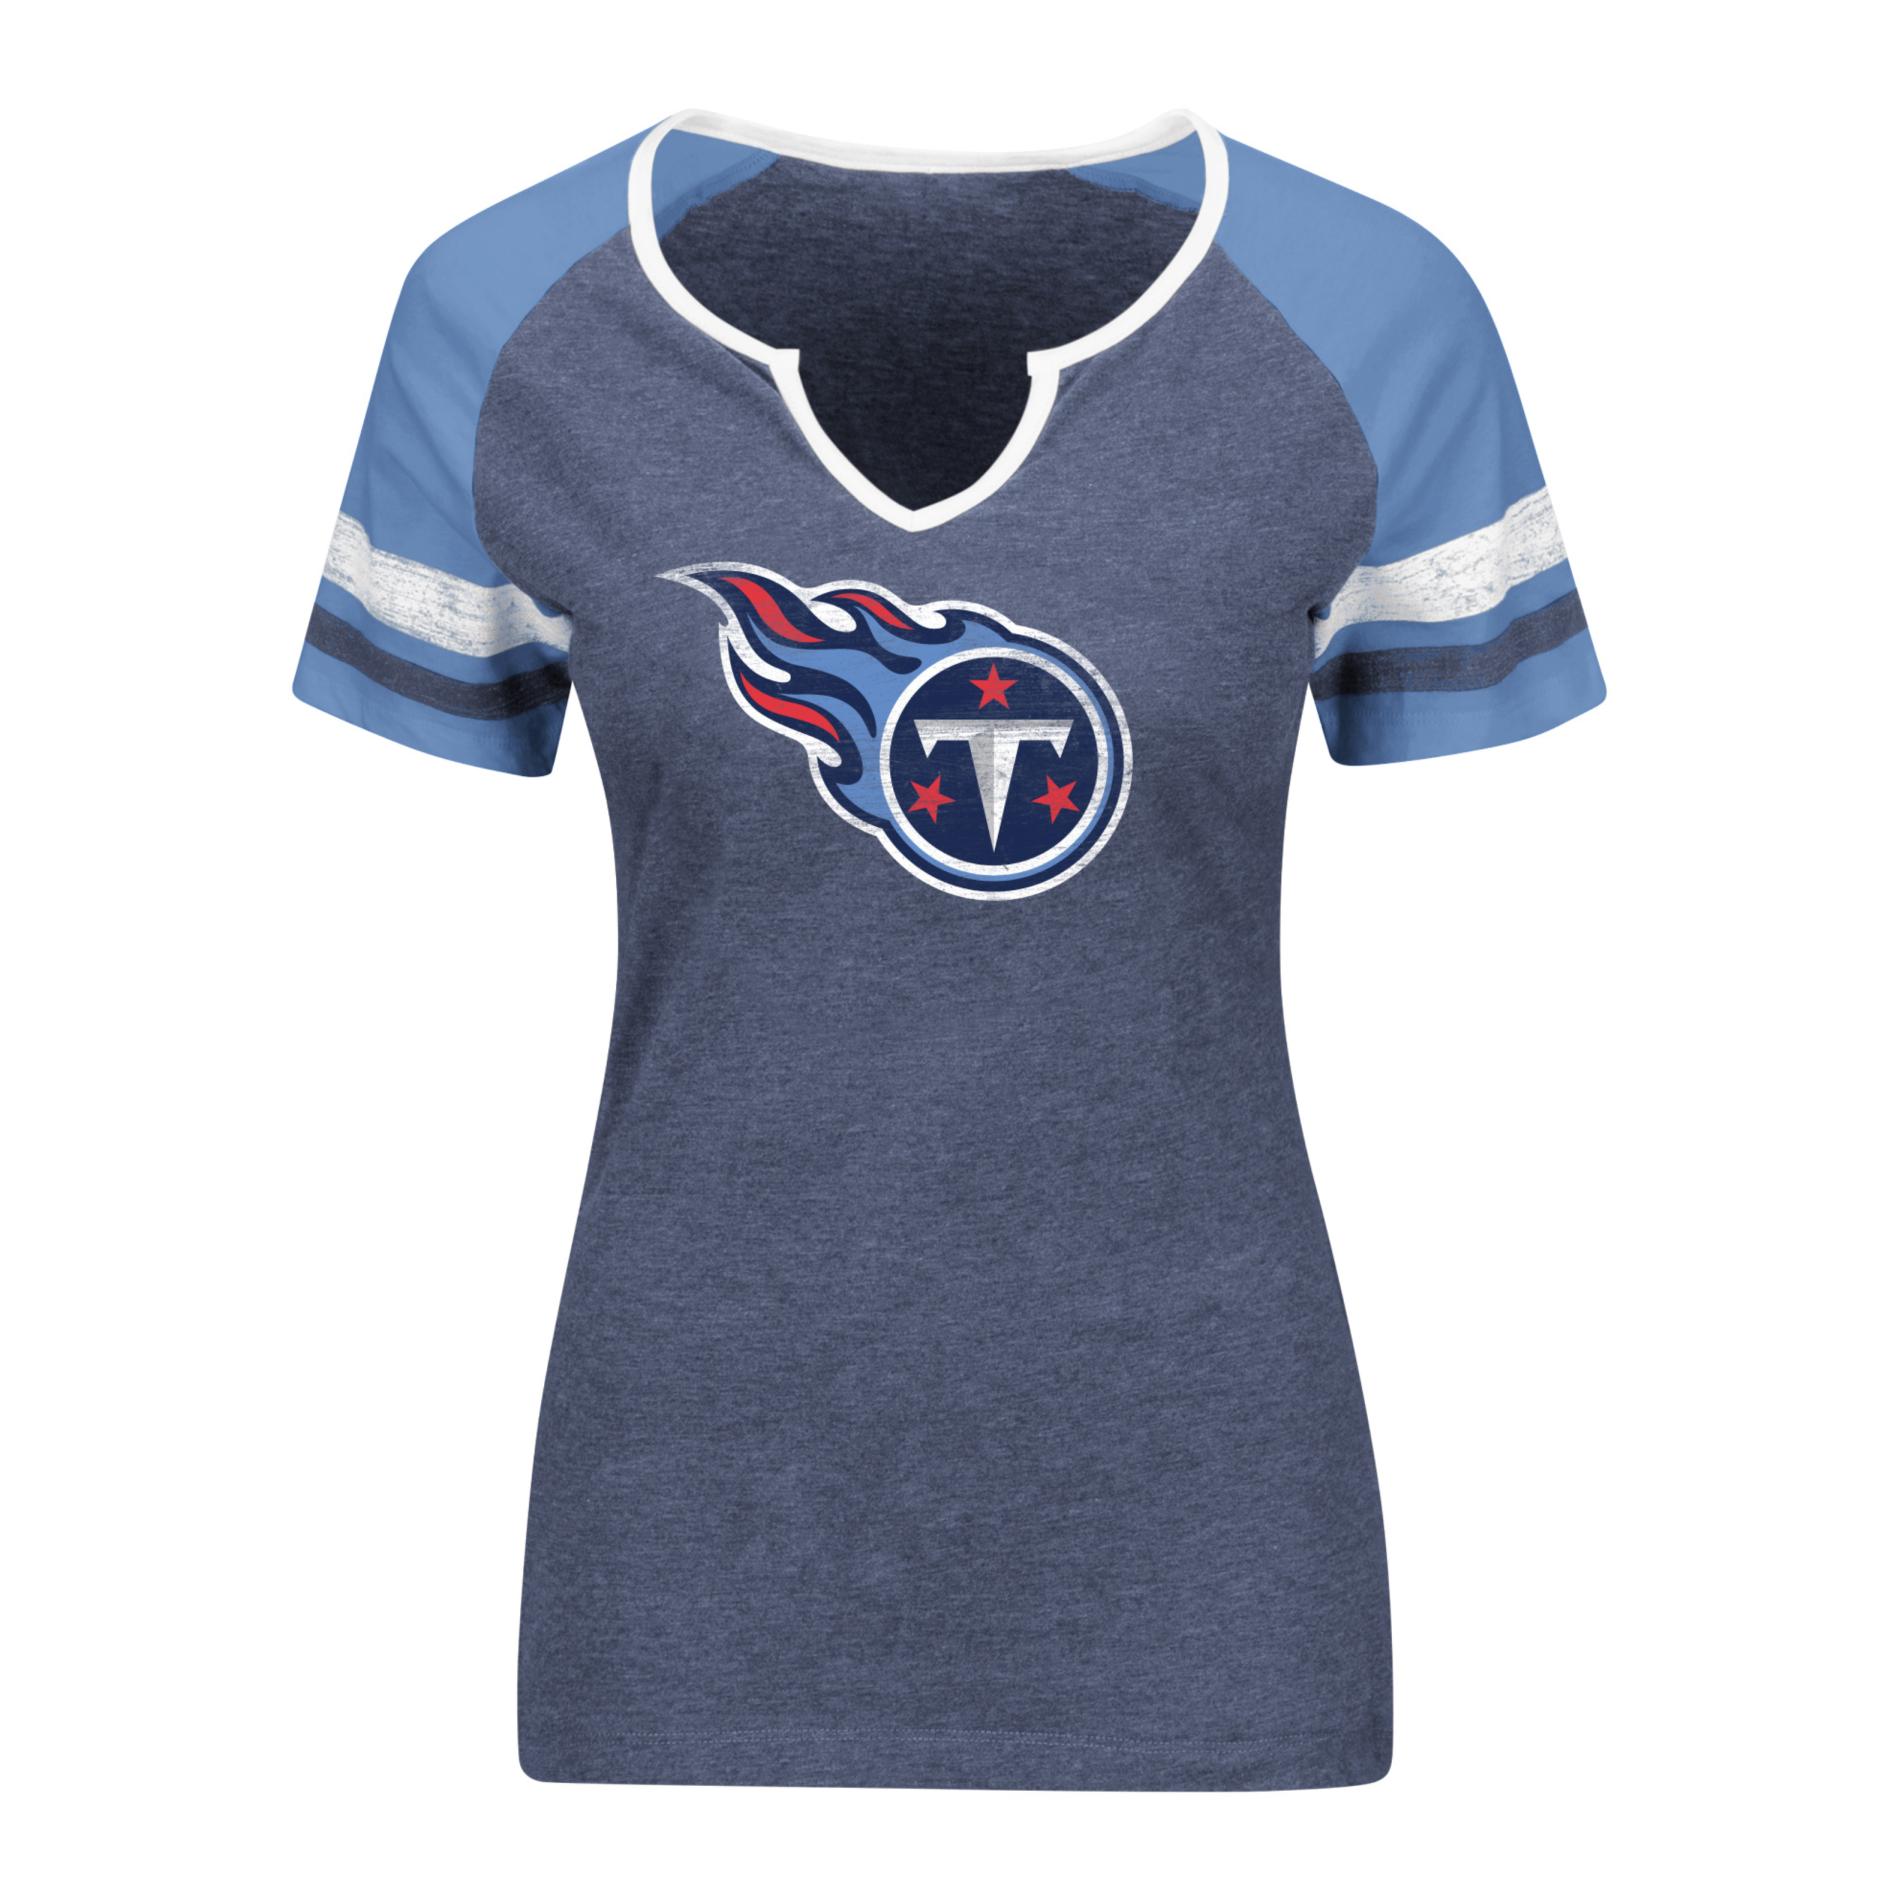 NFL Women's Notched Neck Graphic T-Shirt - Tennessee Titans